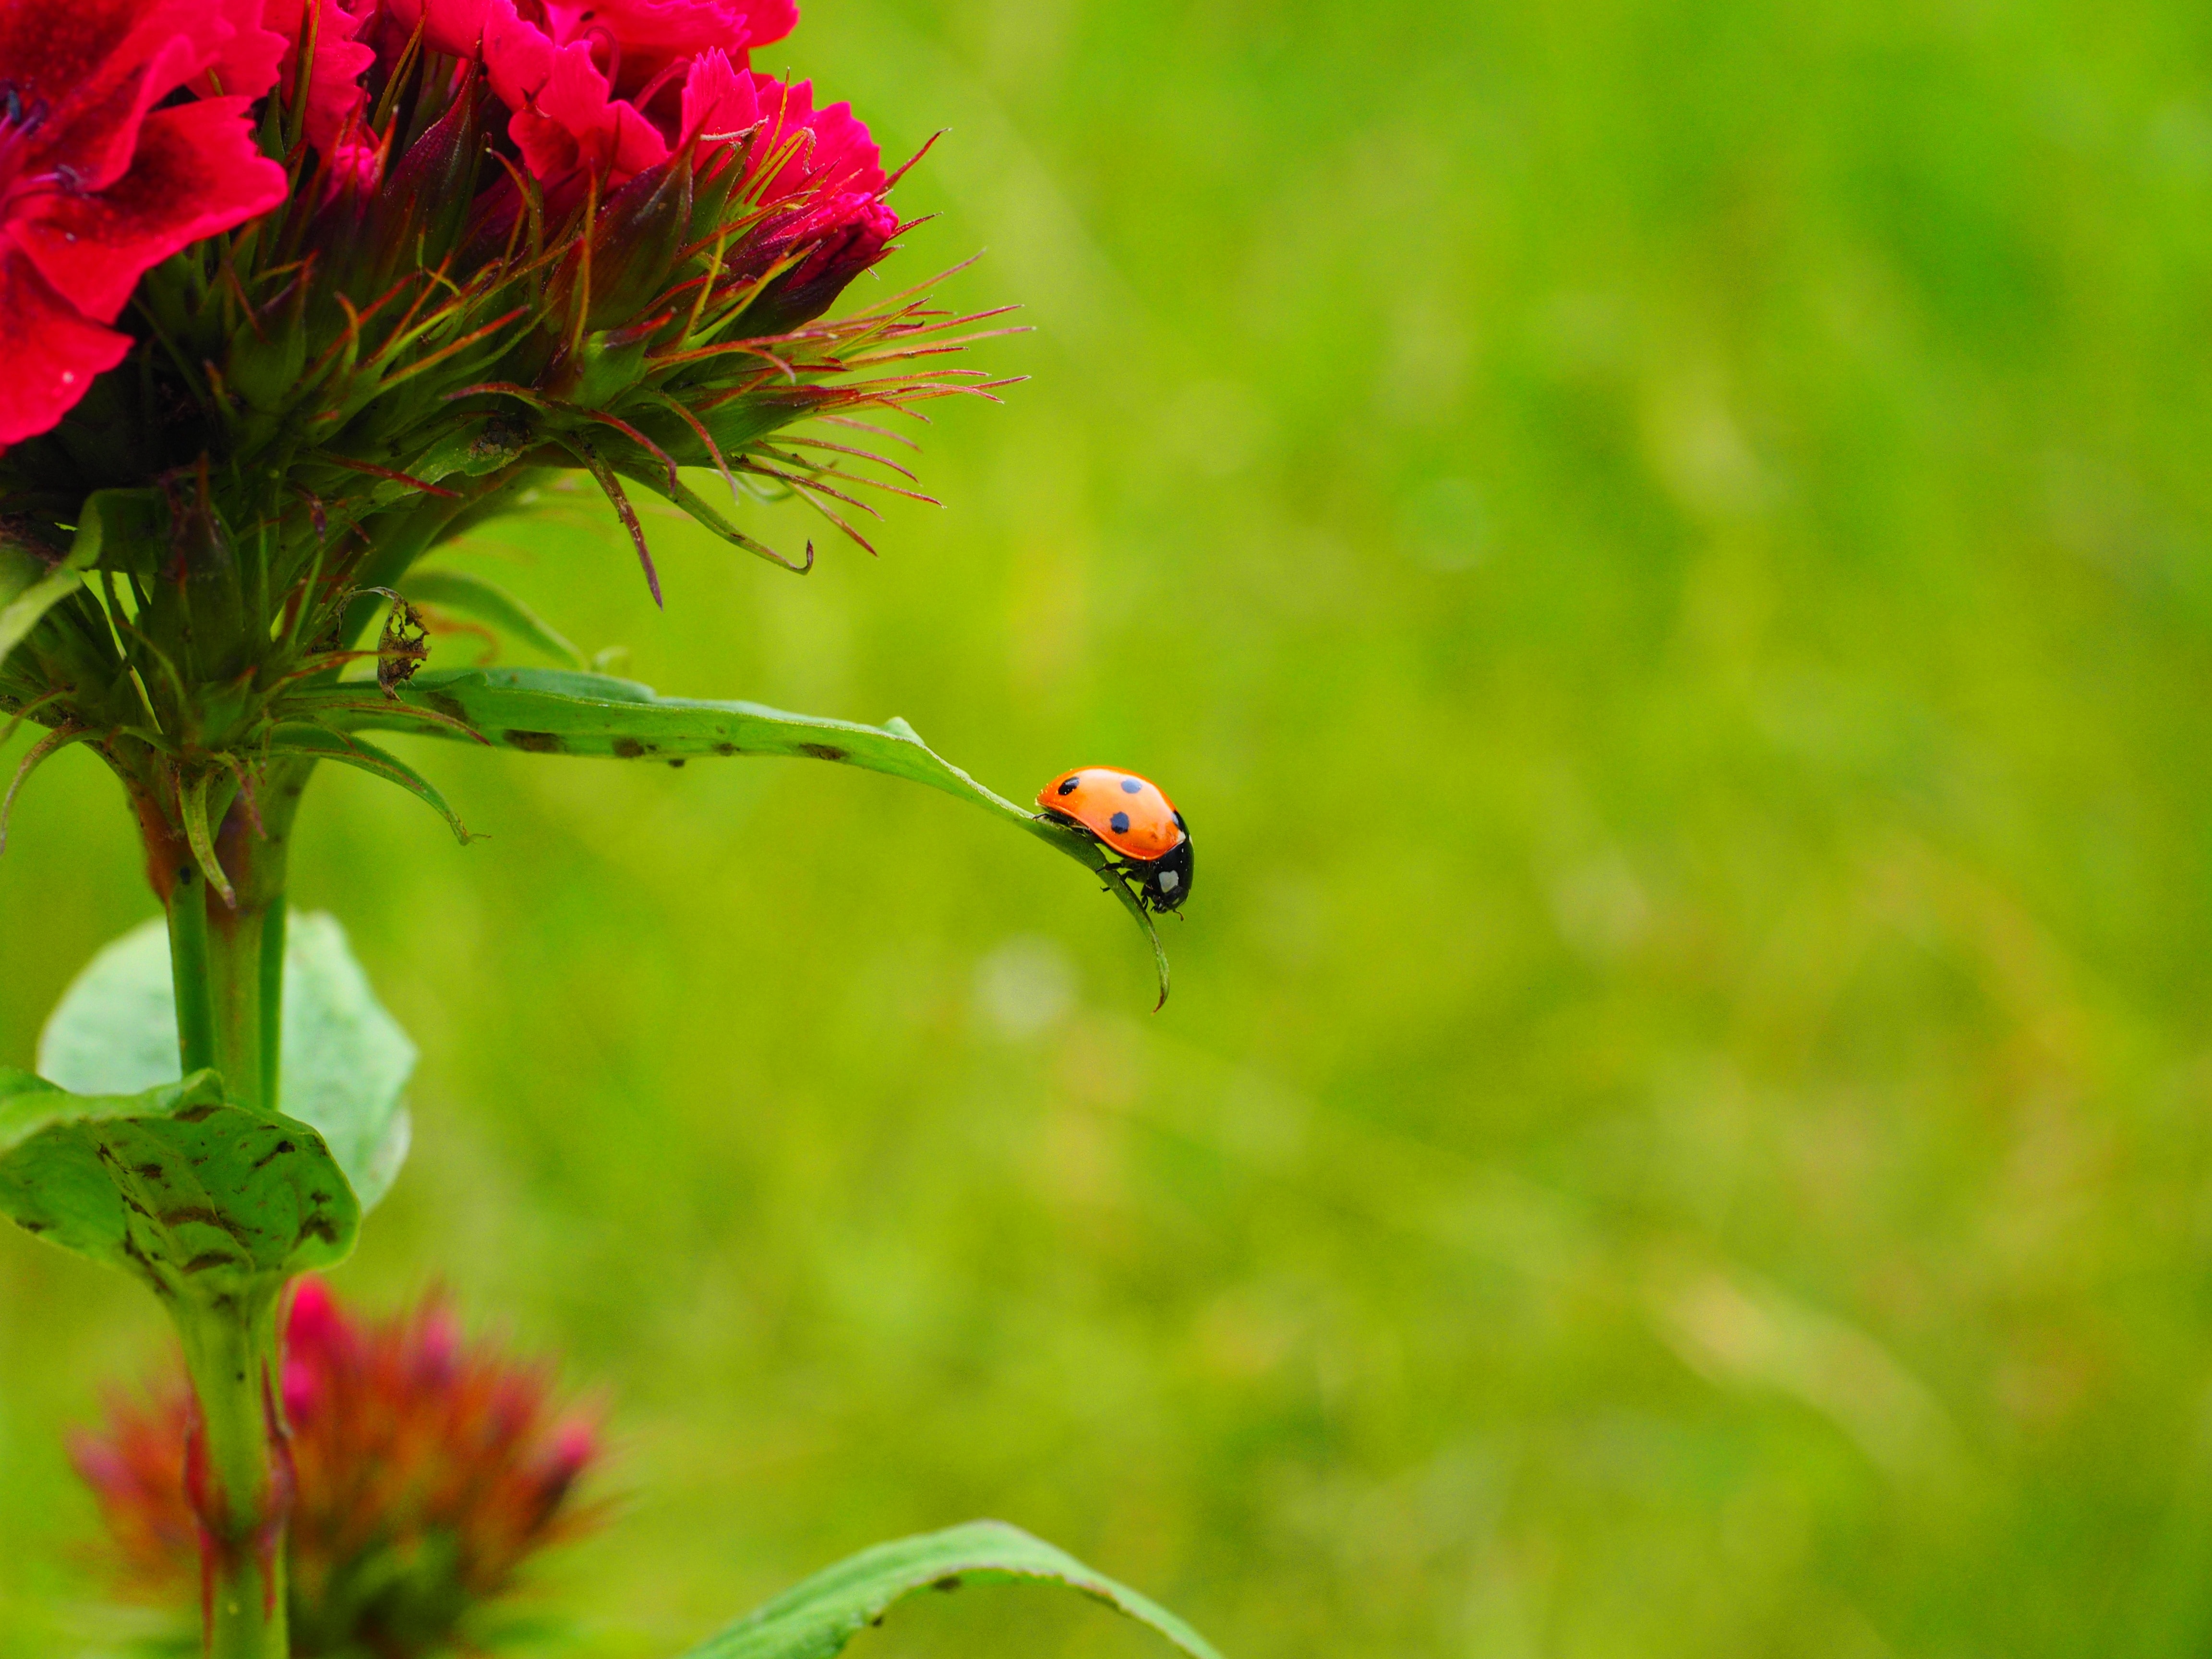 red spotted ladybug